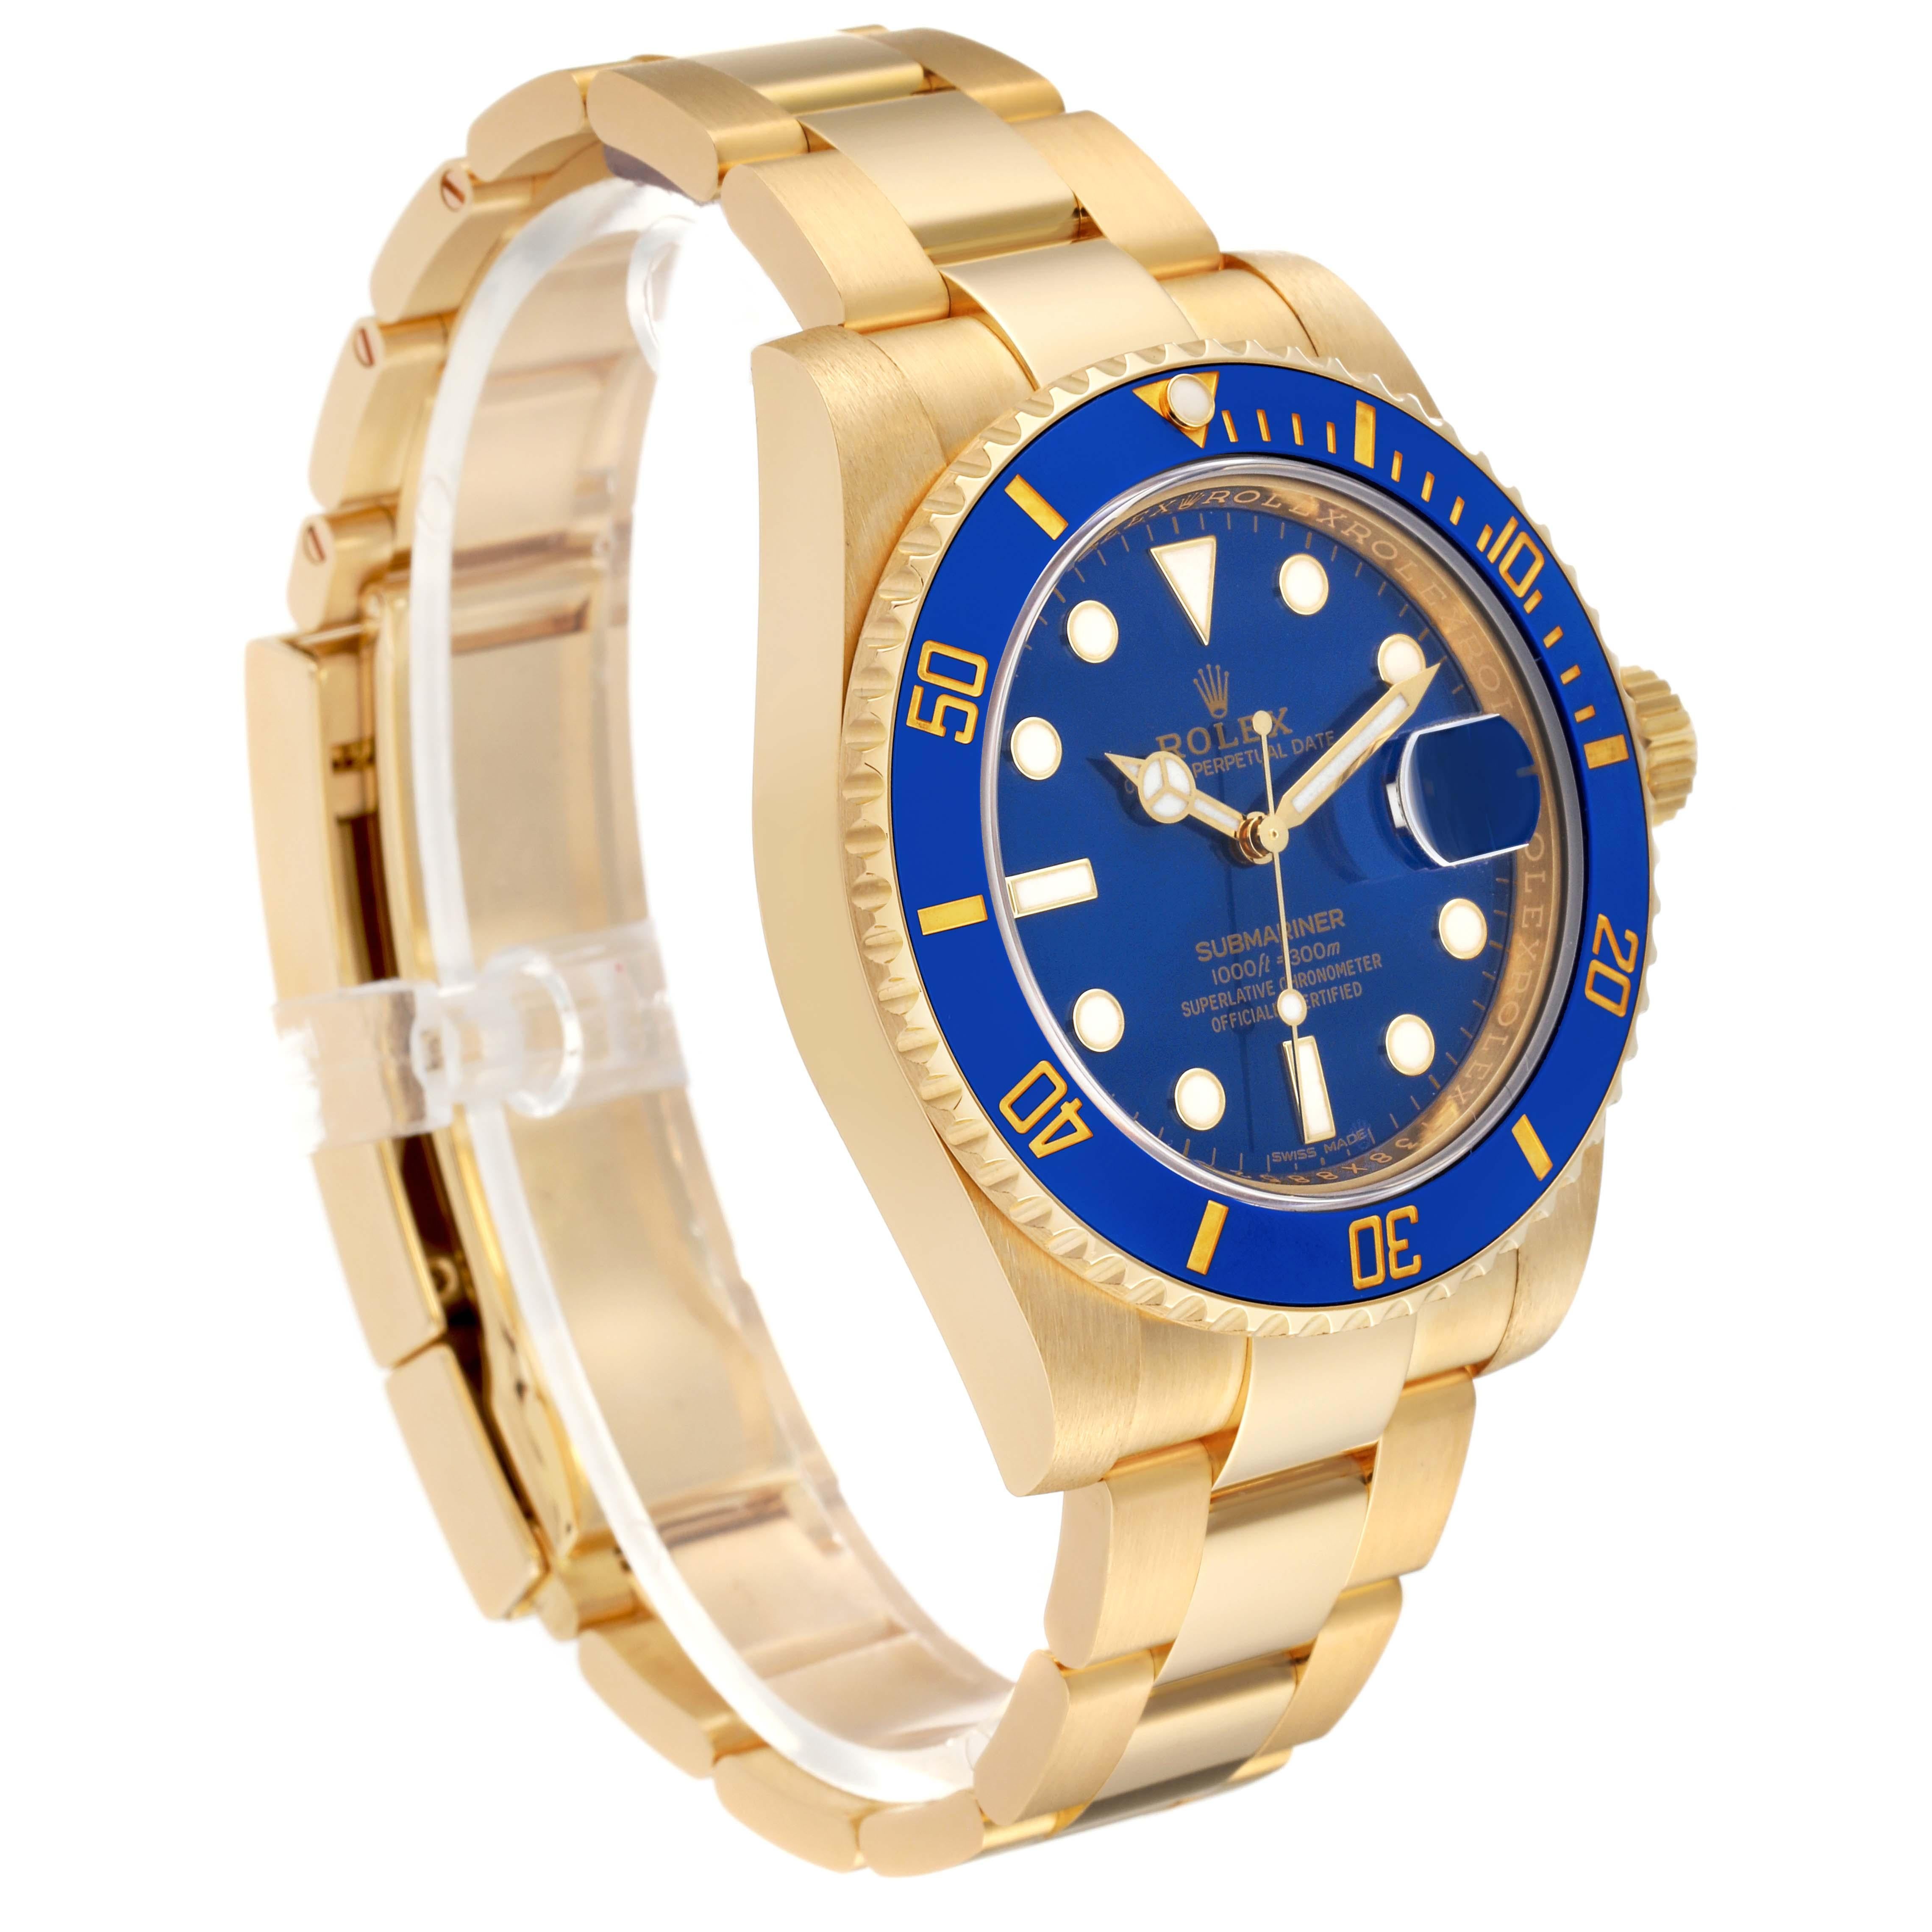 Rolex Submariner Yellow Gold Blue Dial Ceramic Bezel Mens Watch 116618 Box Card For Sale 1